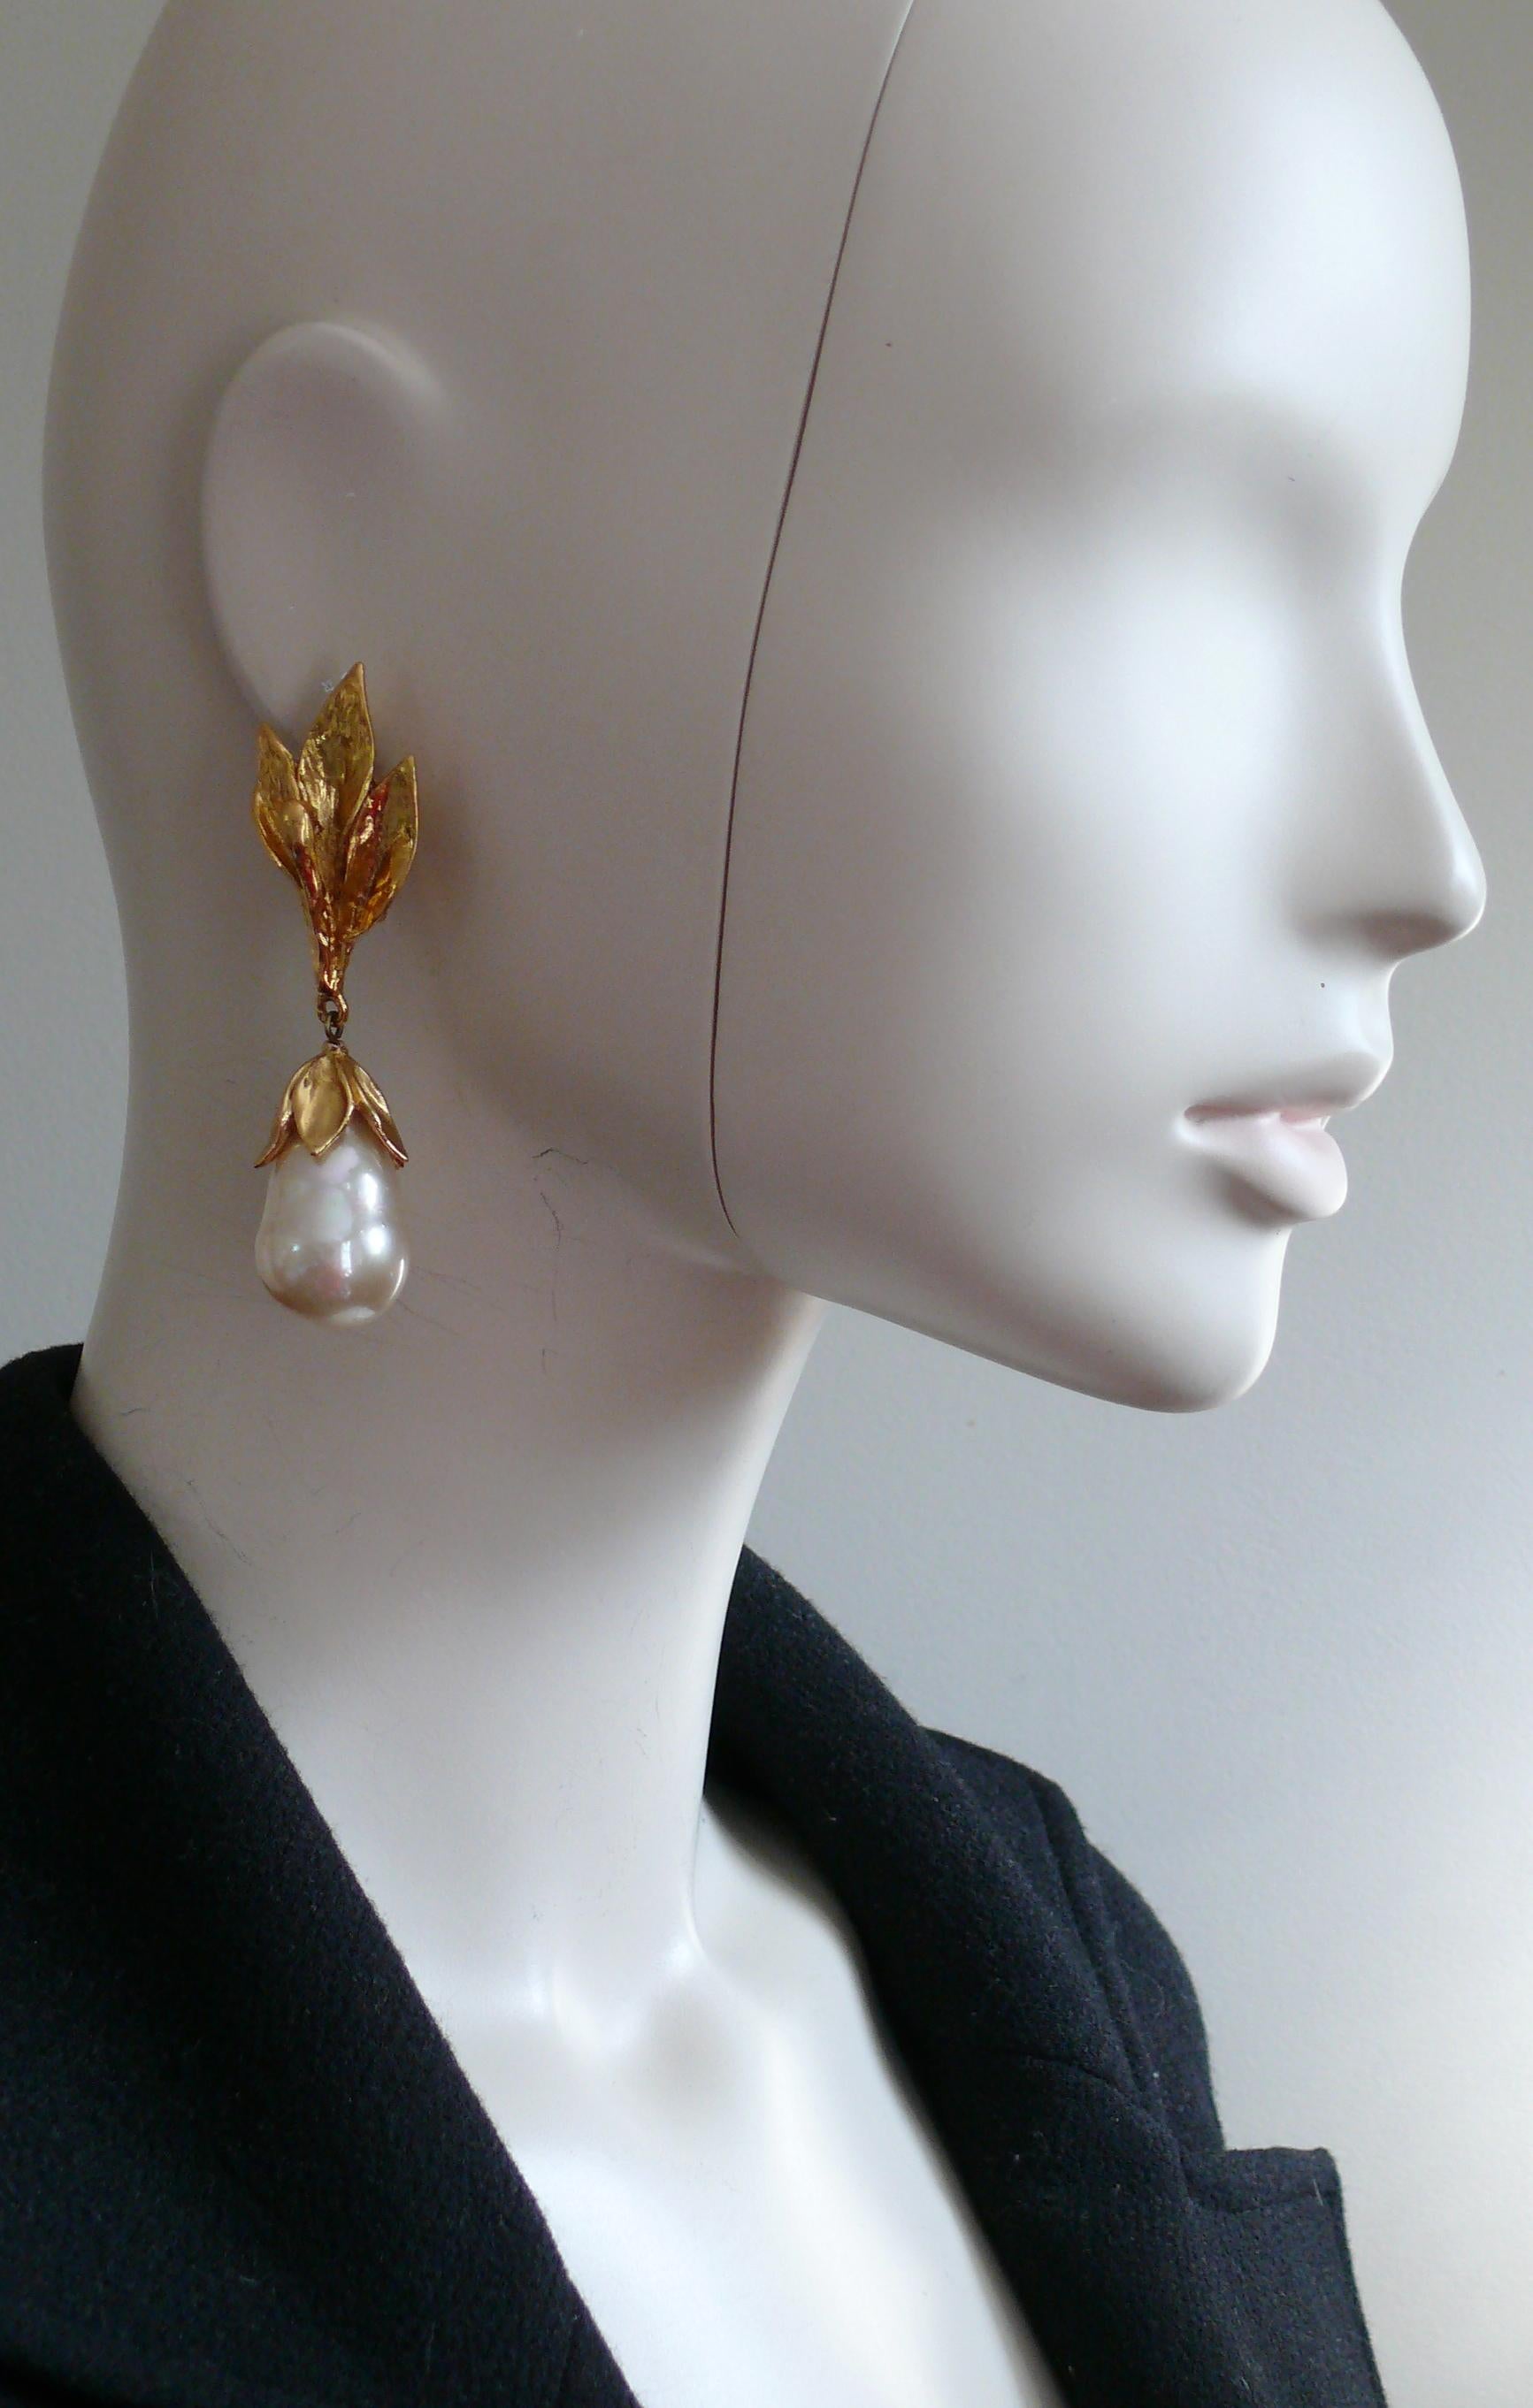 YVES SAINT LAURENT vintage gold toned dangling earrings (clip-on) featuring a 3-dimensional foliage design embellished with a large baroque faux pearl drop.

Embossed YSL Made in France.

Indicative measurements : height approx. 7.6 cm (2.99